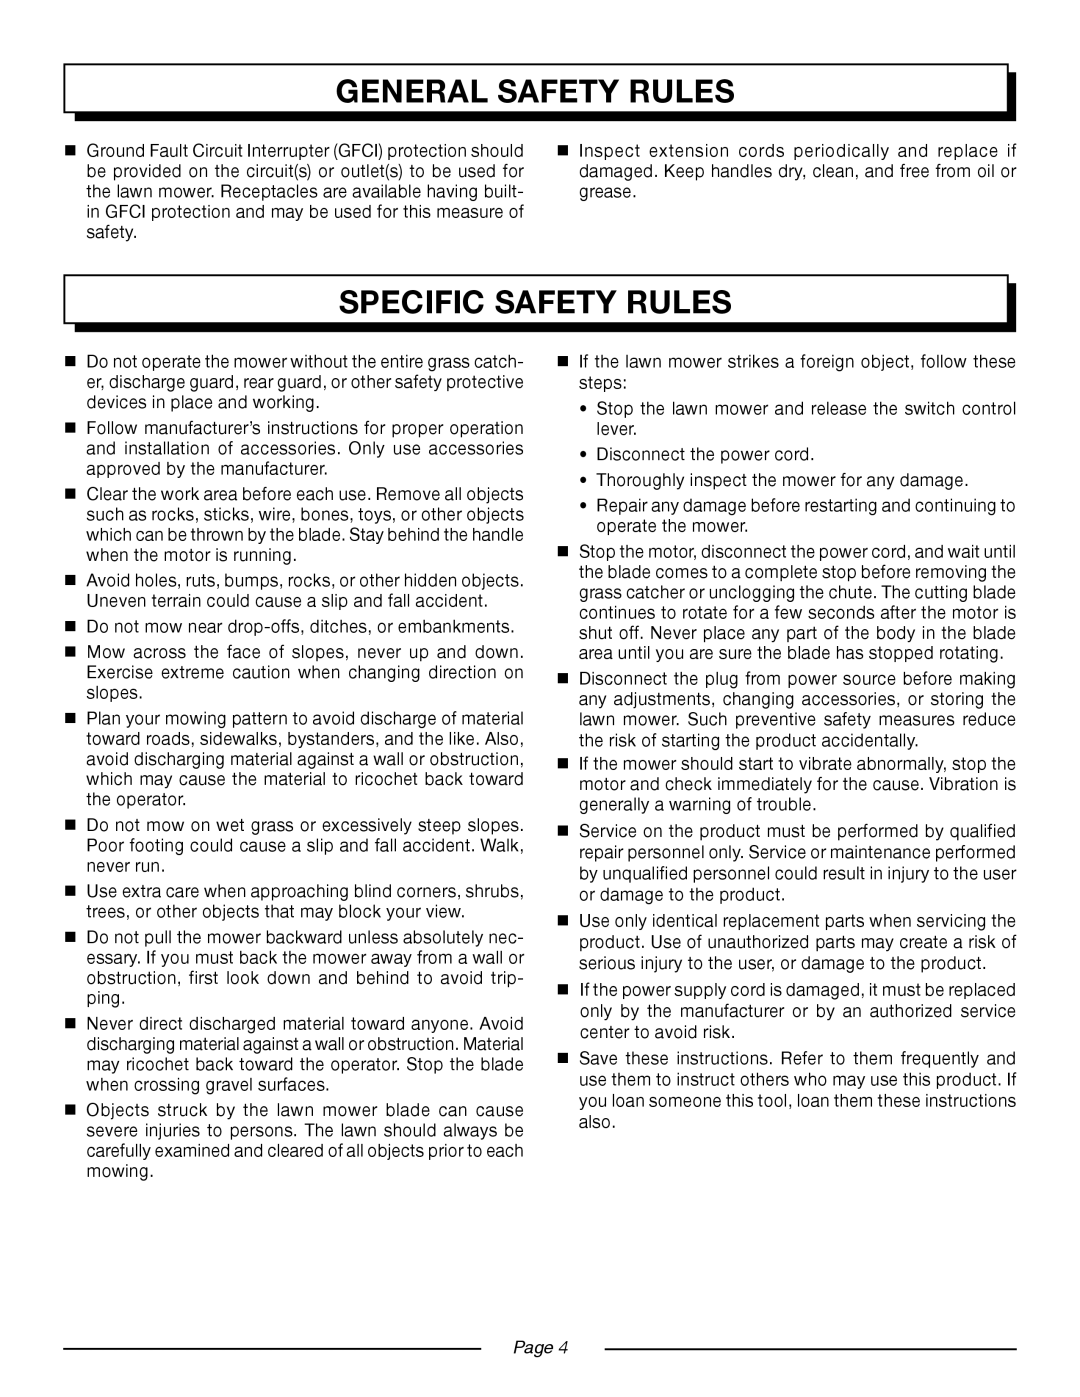 Homelite UT13218, UT13220 manual Specific Safety Rules, General Safety Rules, Page 